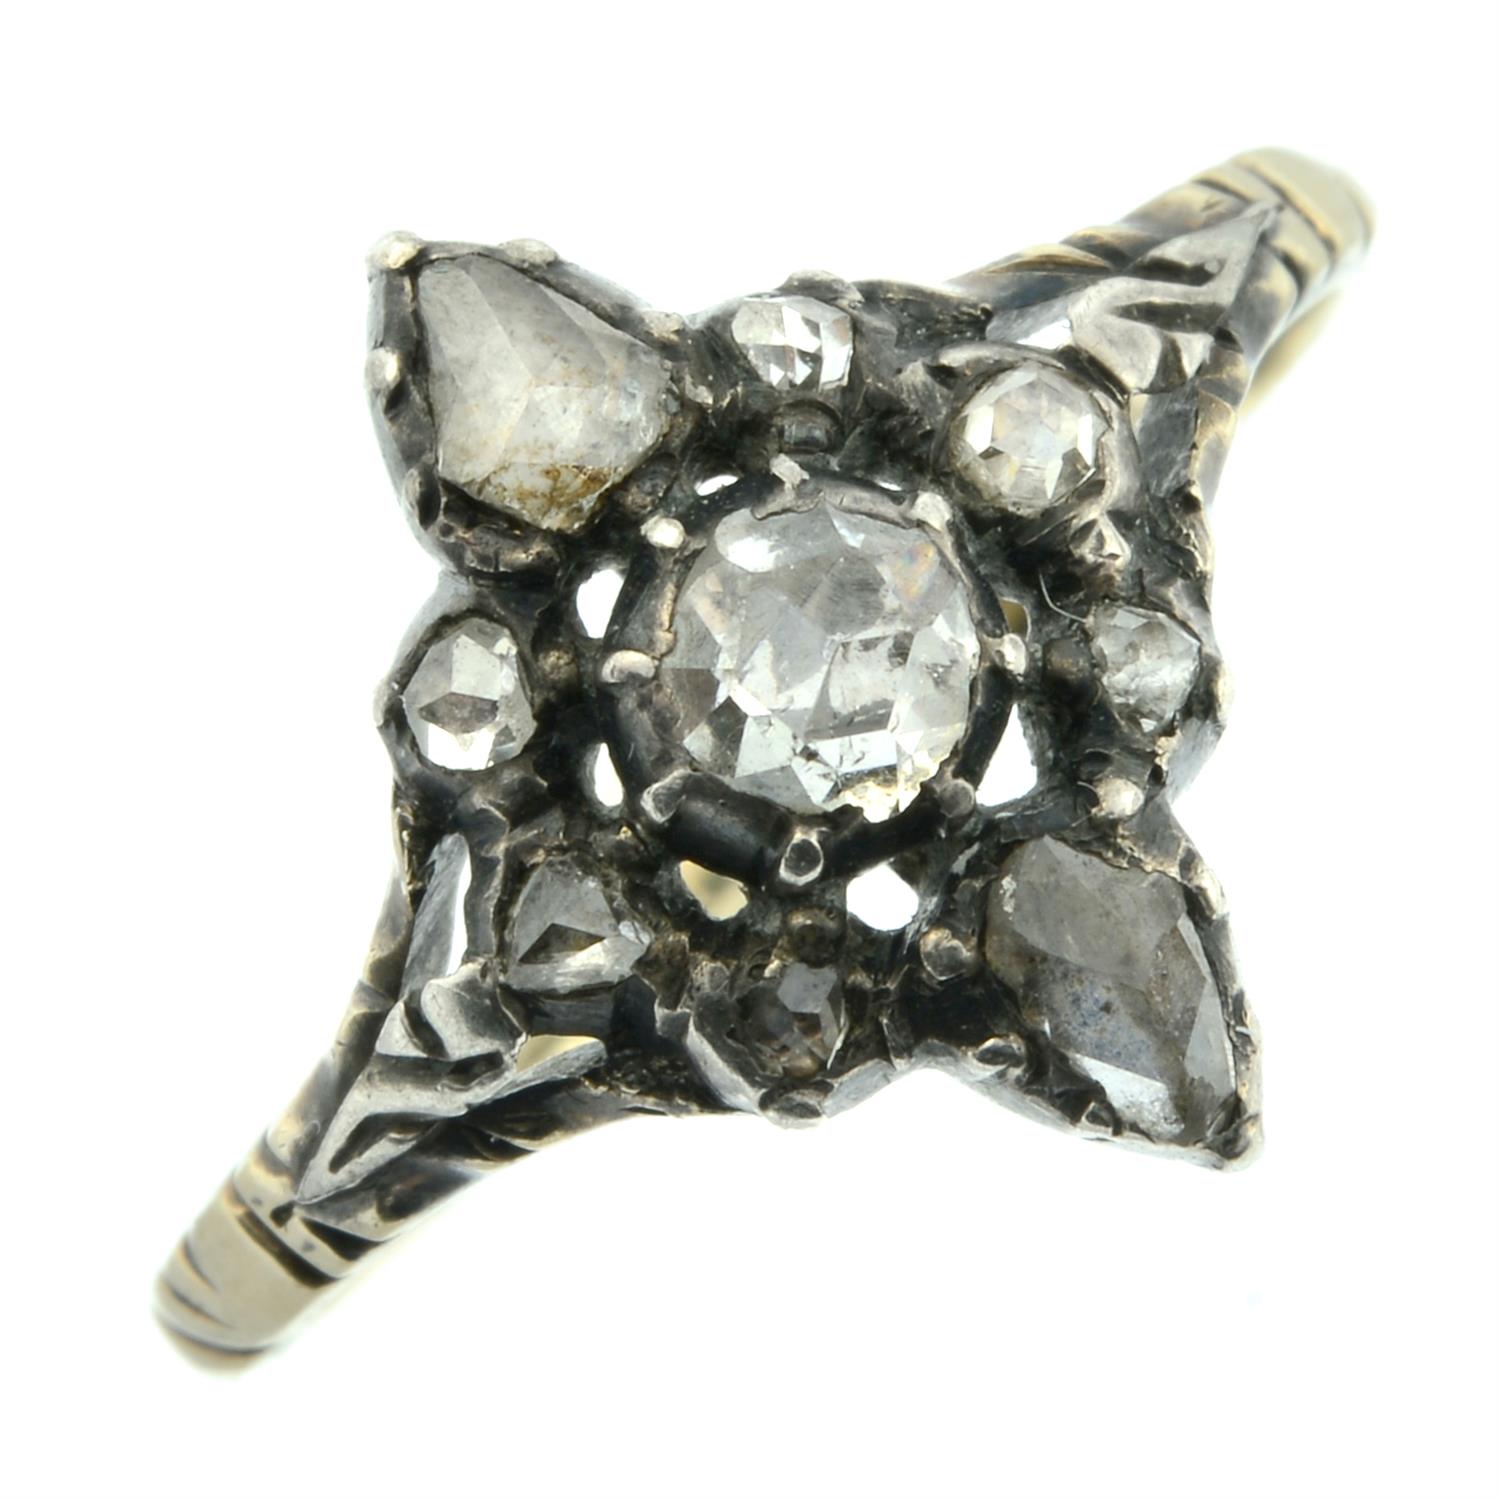 A 19th century silver and gold foil back rose-cut diamond cluster ring. - Image 2 of 5